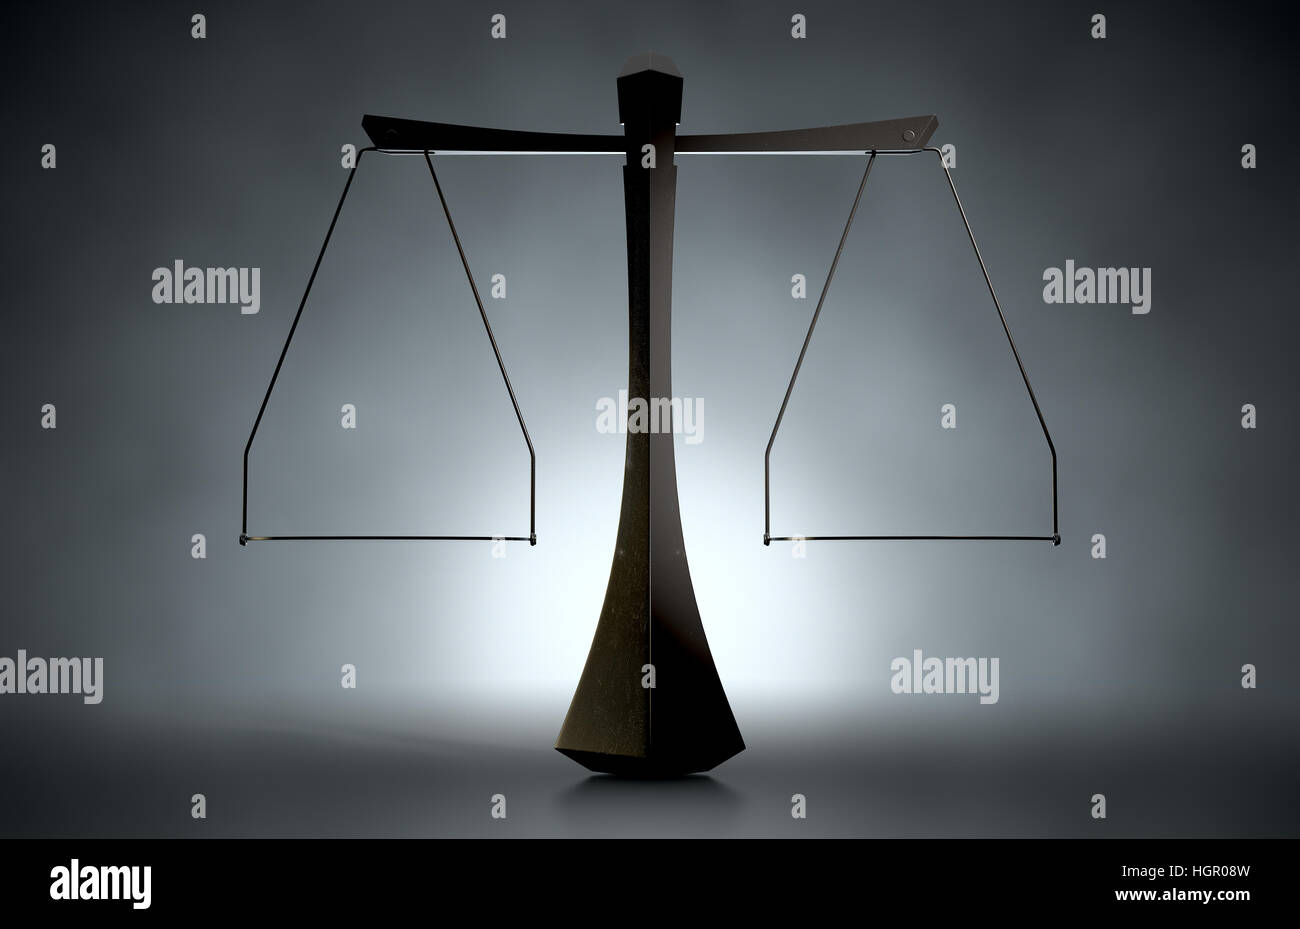 A 3D render of a modern simplistic justice scale back lit on an eerie dark background Stock Photo